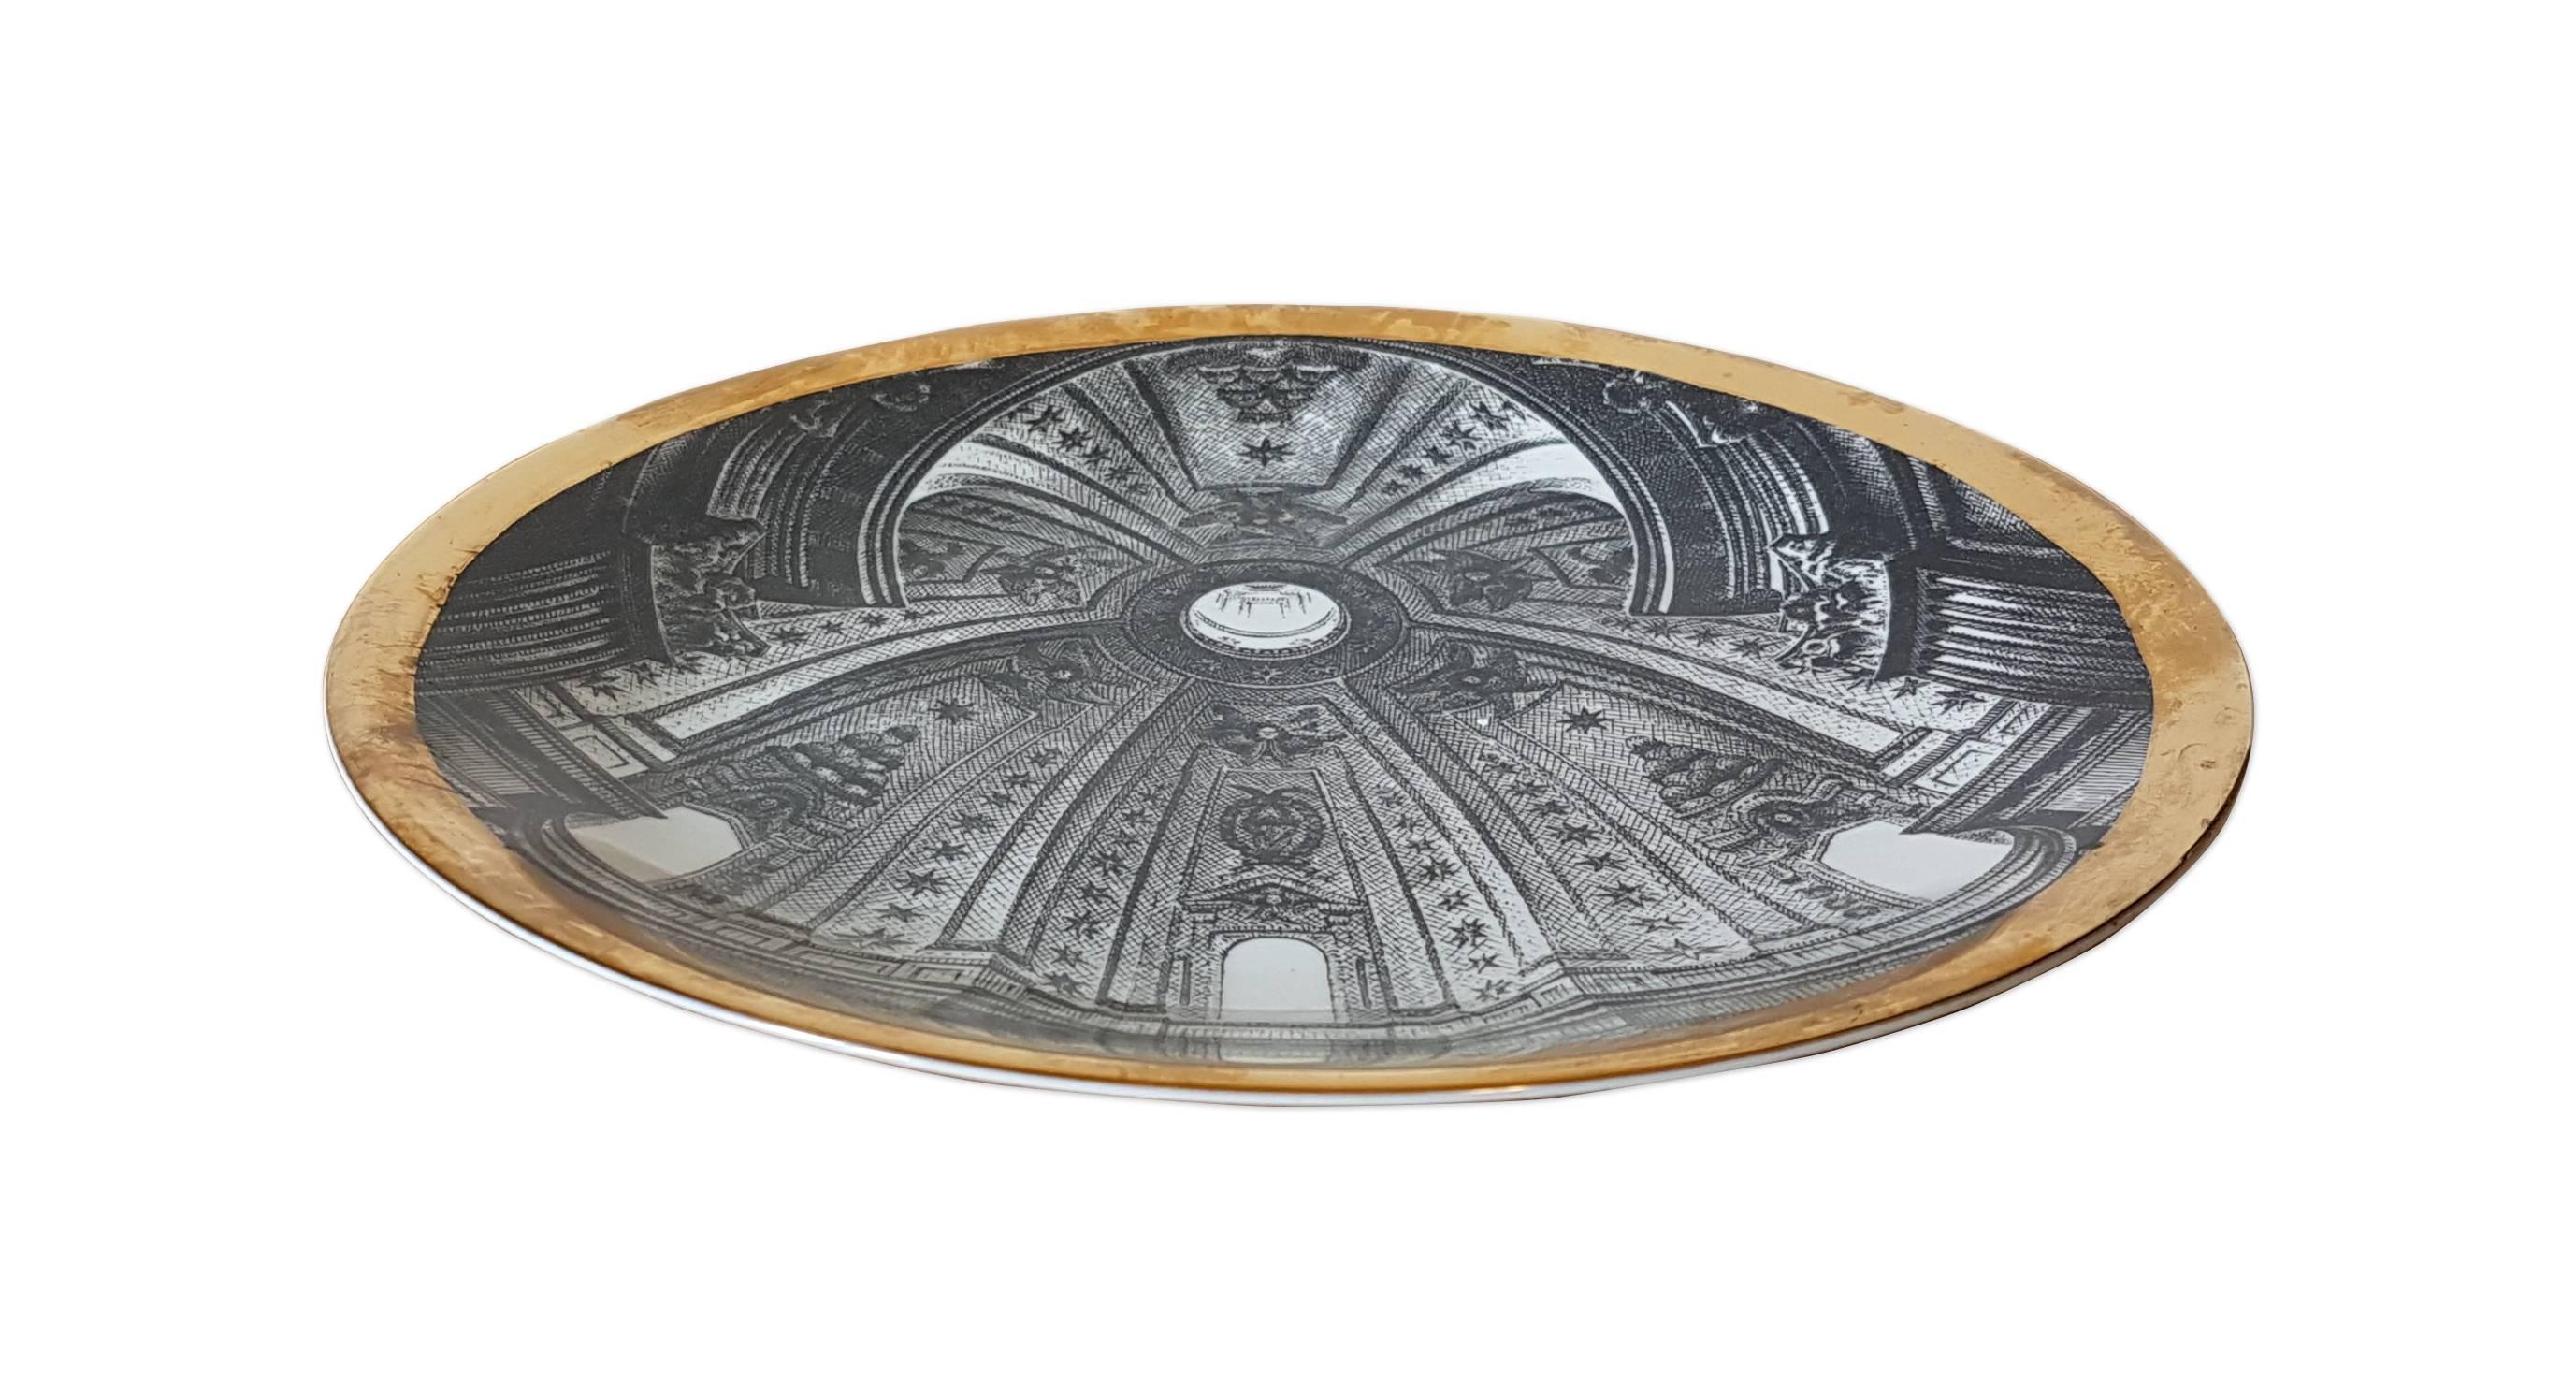 Decorated porcelain
Plate number 4 from the series Cupole d’Italia: Cupola di San’Ivo alla Sapienza in Roma.
Each plate with a different dome of an Italian church seen from the inside named and numbered on the reverse. These plates were designed